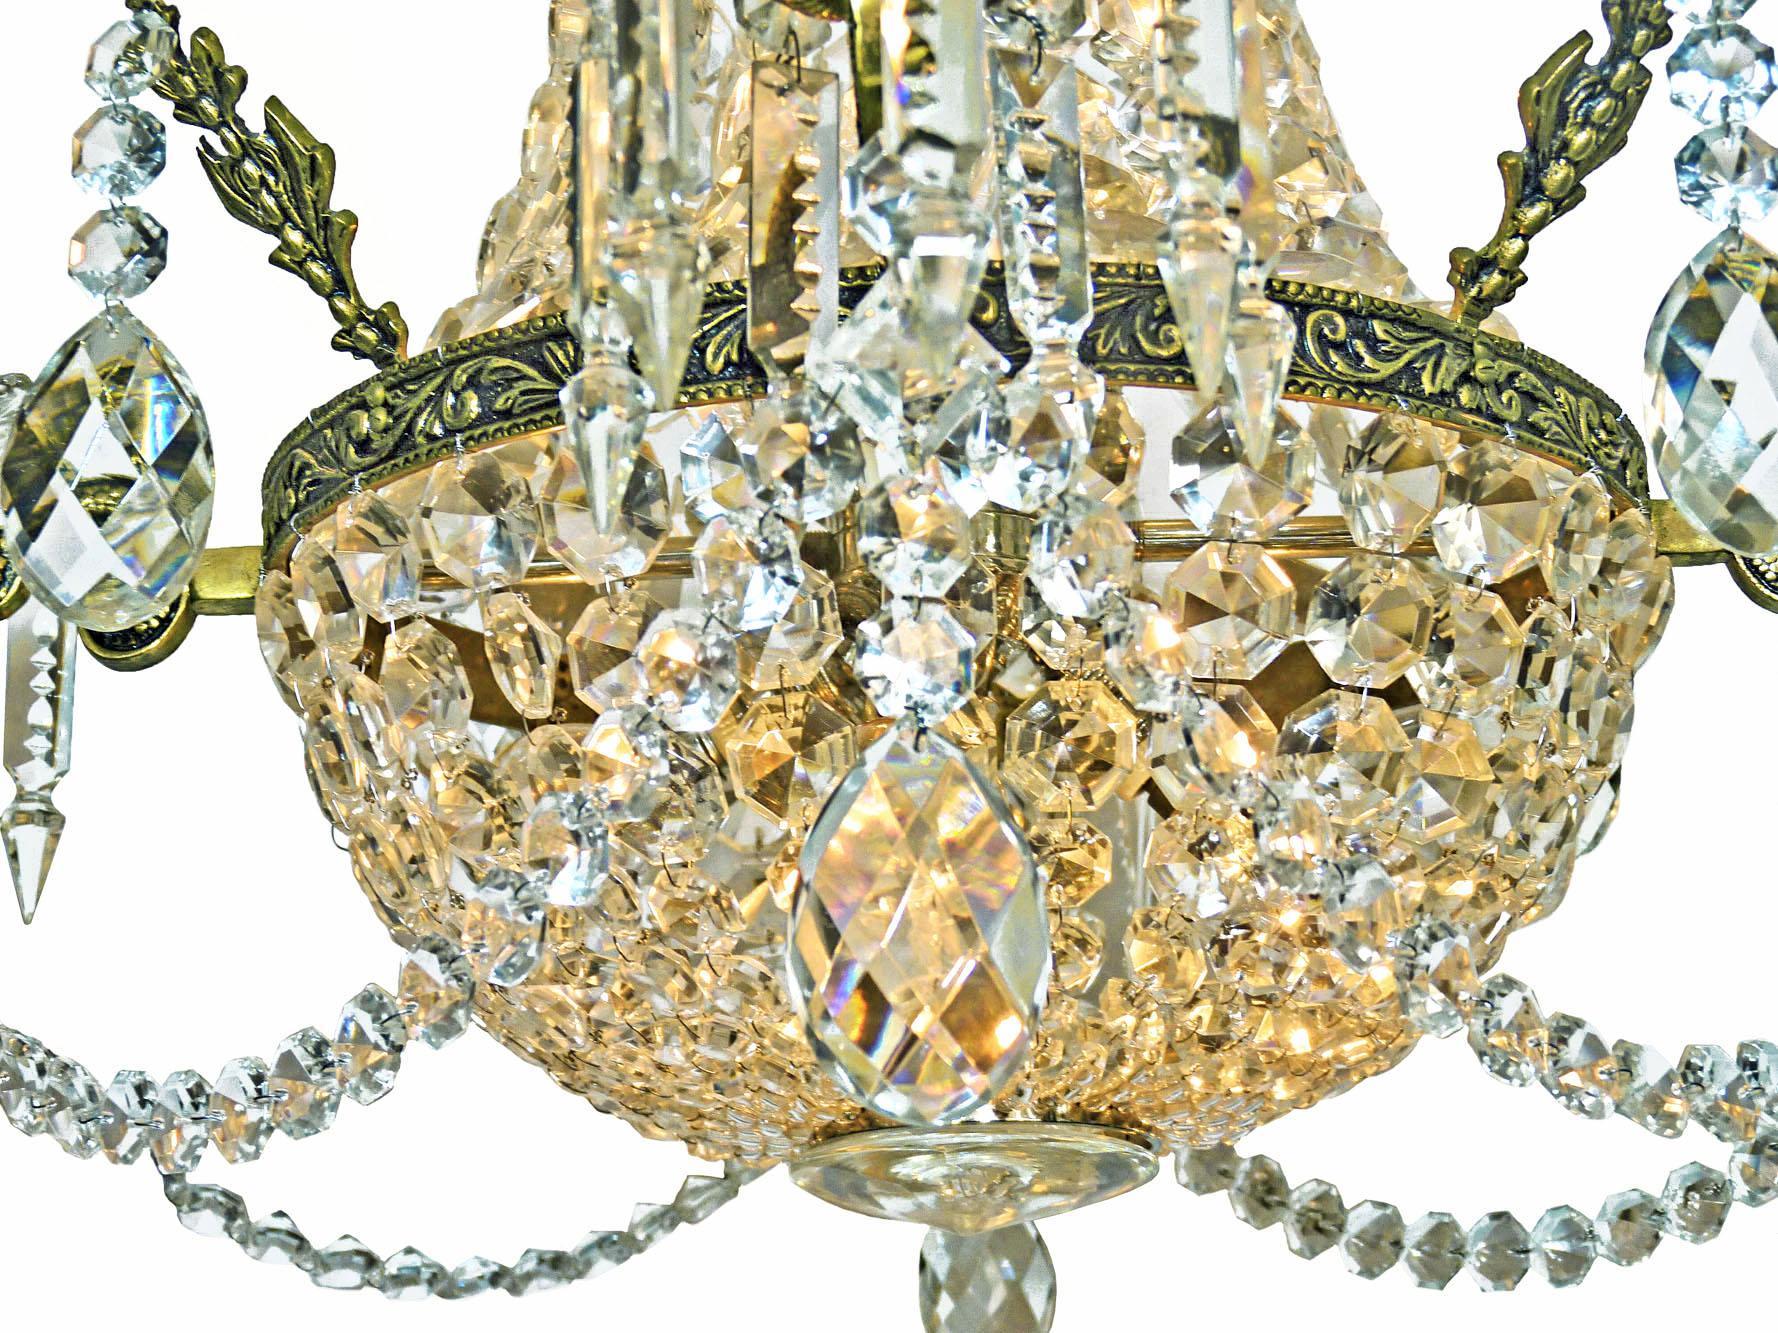 French Louis XVI Regency Empire Cut Crystal & Bronze 10-Light Basket Chandelier In Excellent Condition For Sale In Coimbra, PT